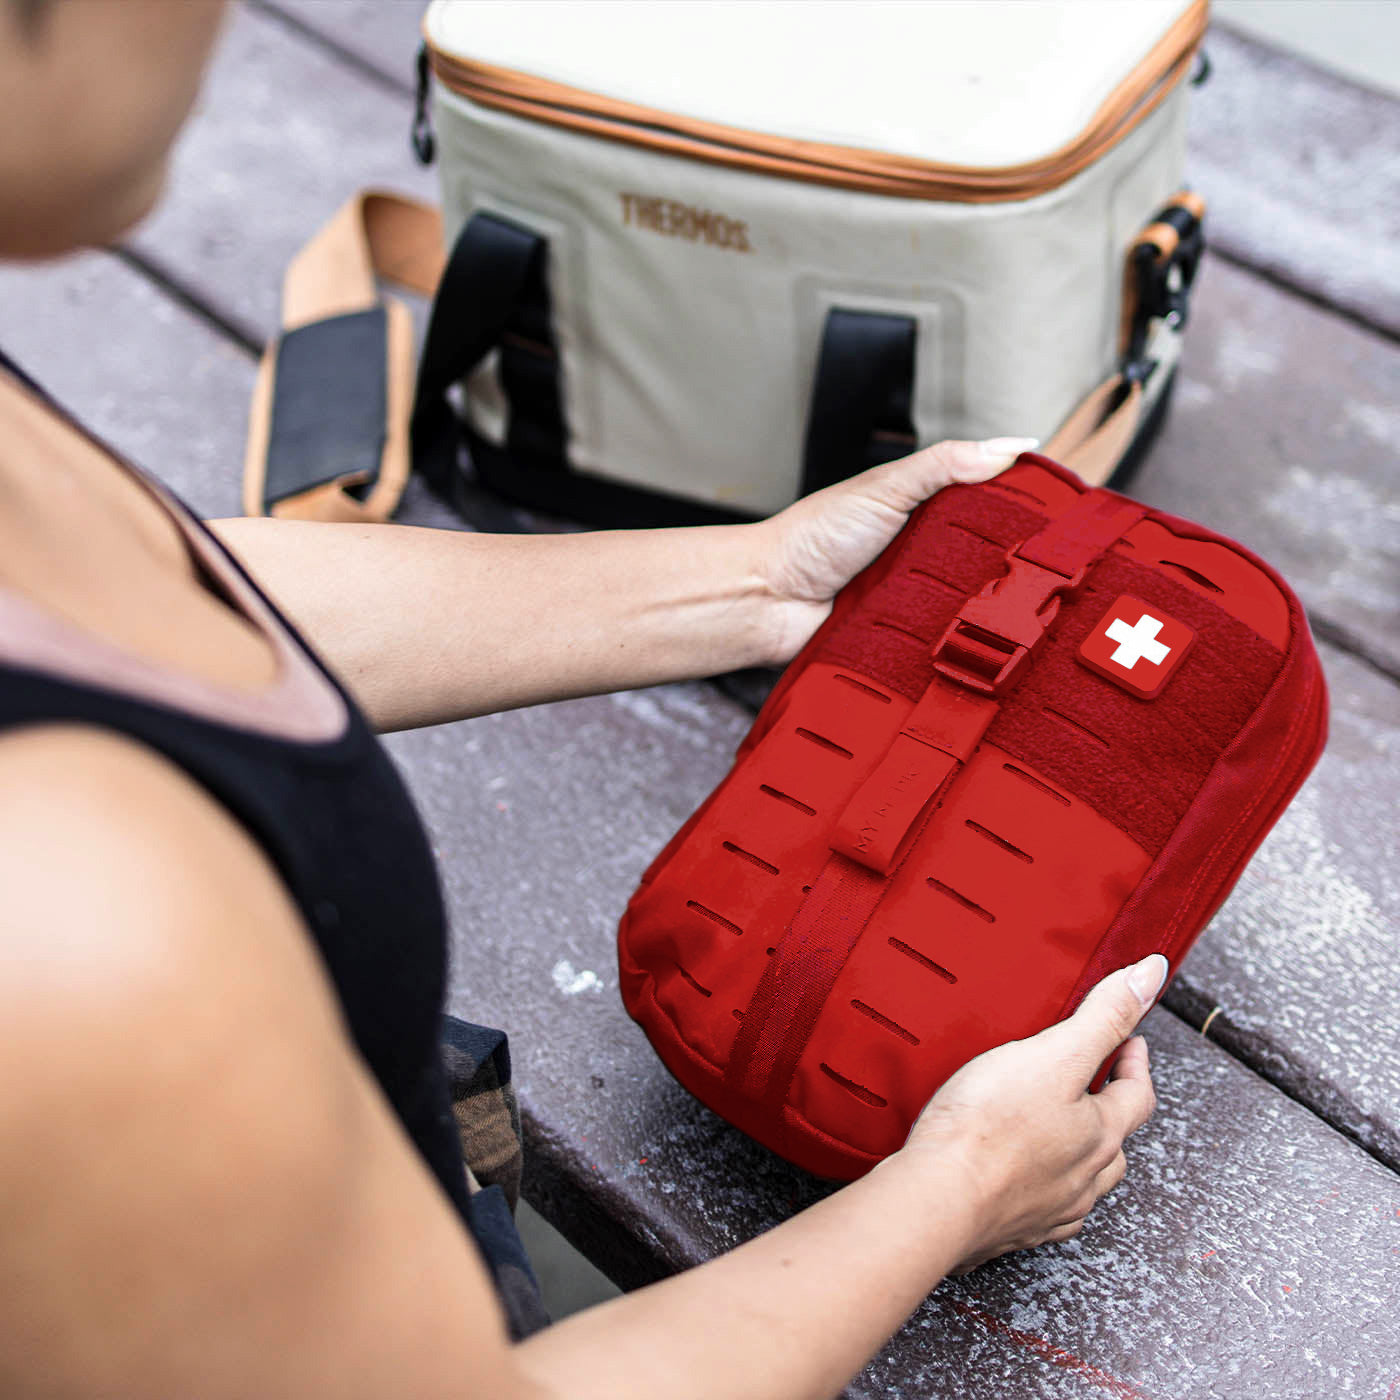 MyFAK Standard First Aid Kit by MyMedic (Red)